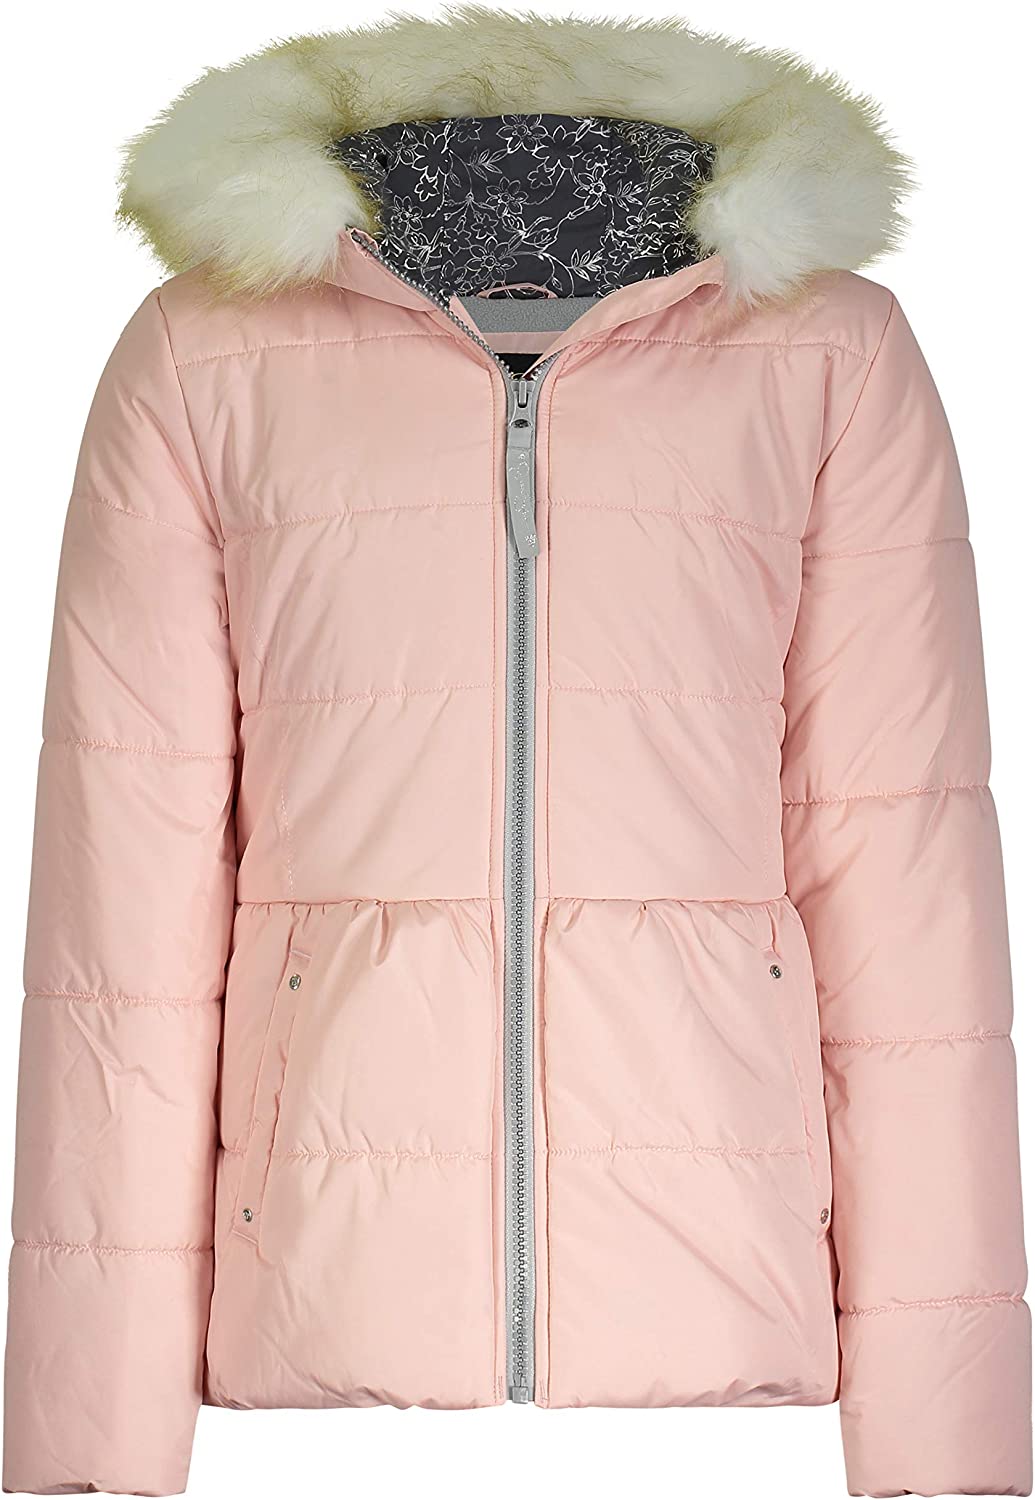 Jessica Simpson Girls Toddler Expedition Parka 